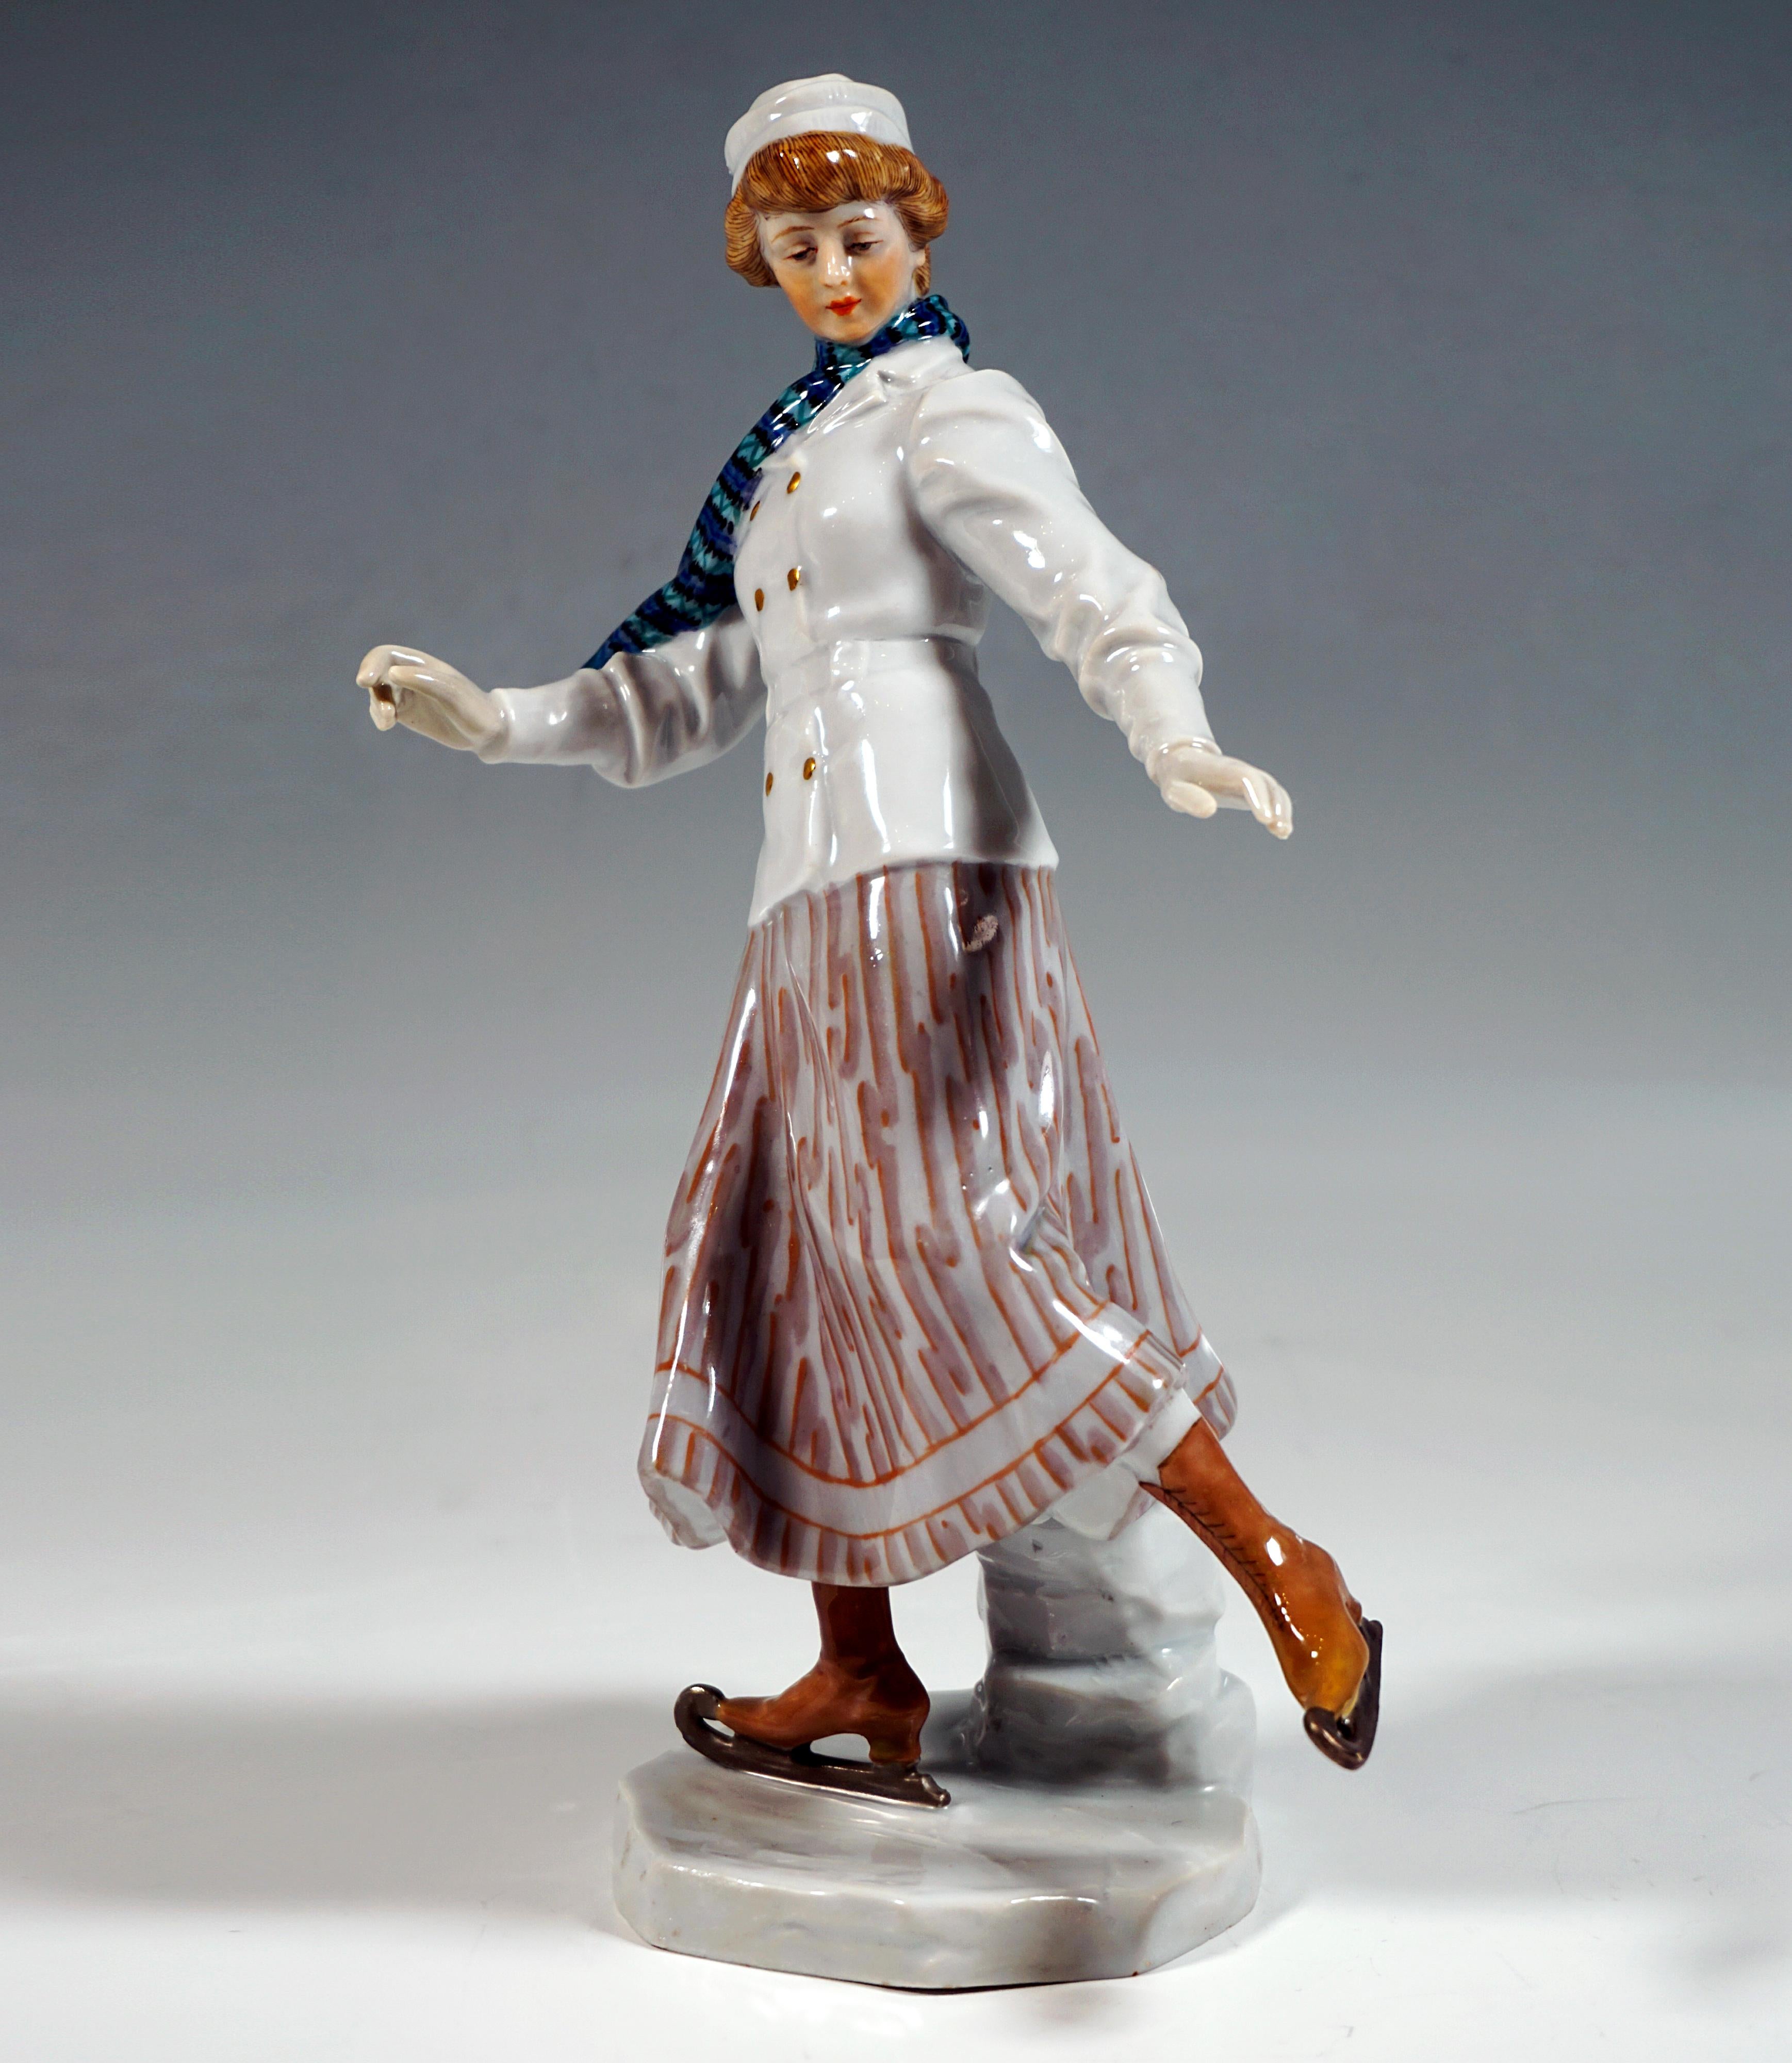 Rare Meissen Art Nouveau porcelain figure:
Skater in elegant winter clothes: lady wearing a long light gray skirt with light brown stripe decoration, white jacket with double-breasted gold buttons and matching belt, white hood on the upswept blond